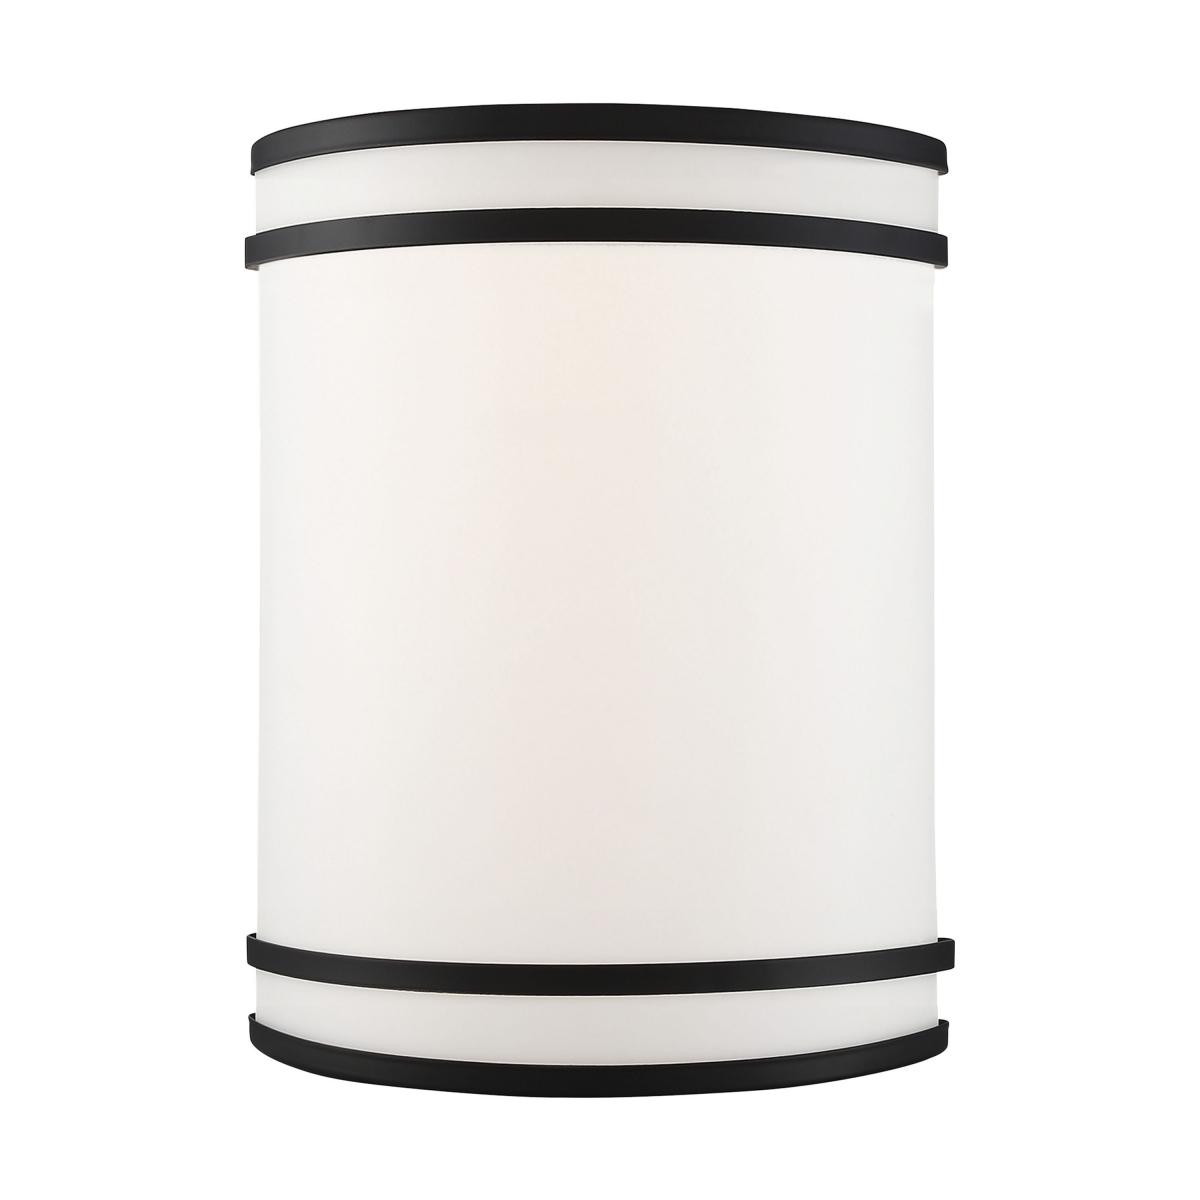 62-1745 LED GLAMOUR BL WALL SCONCE